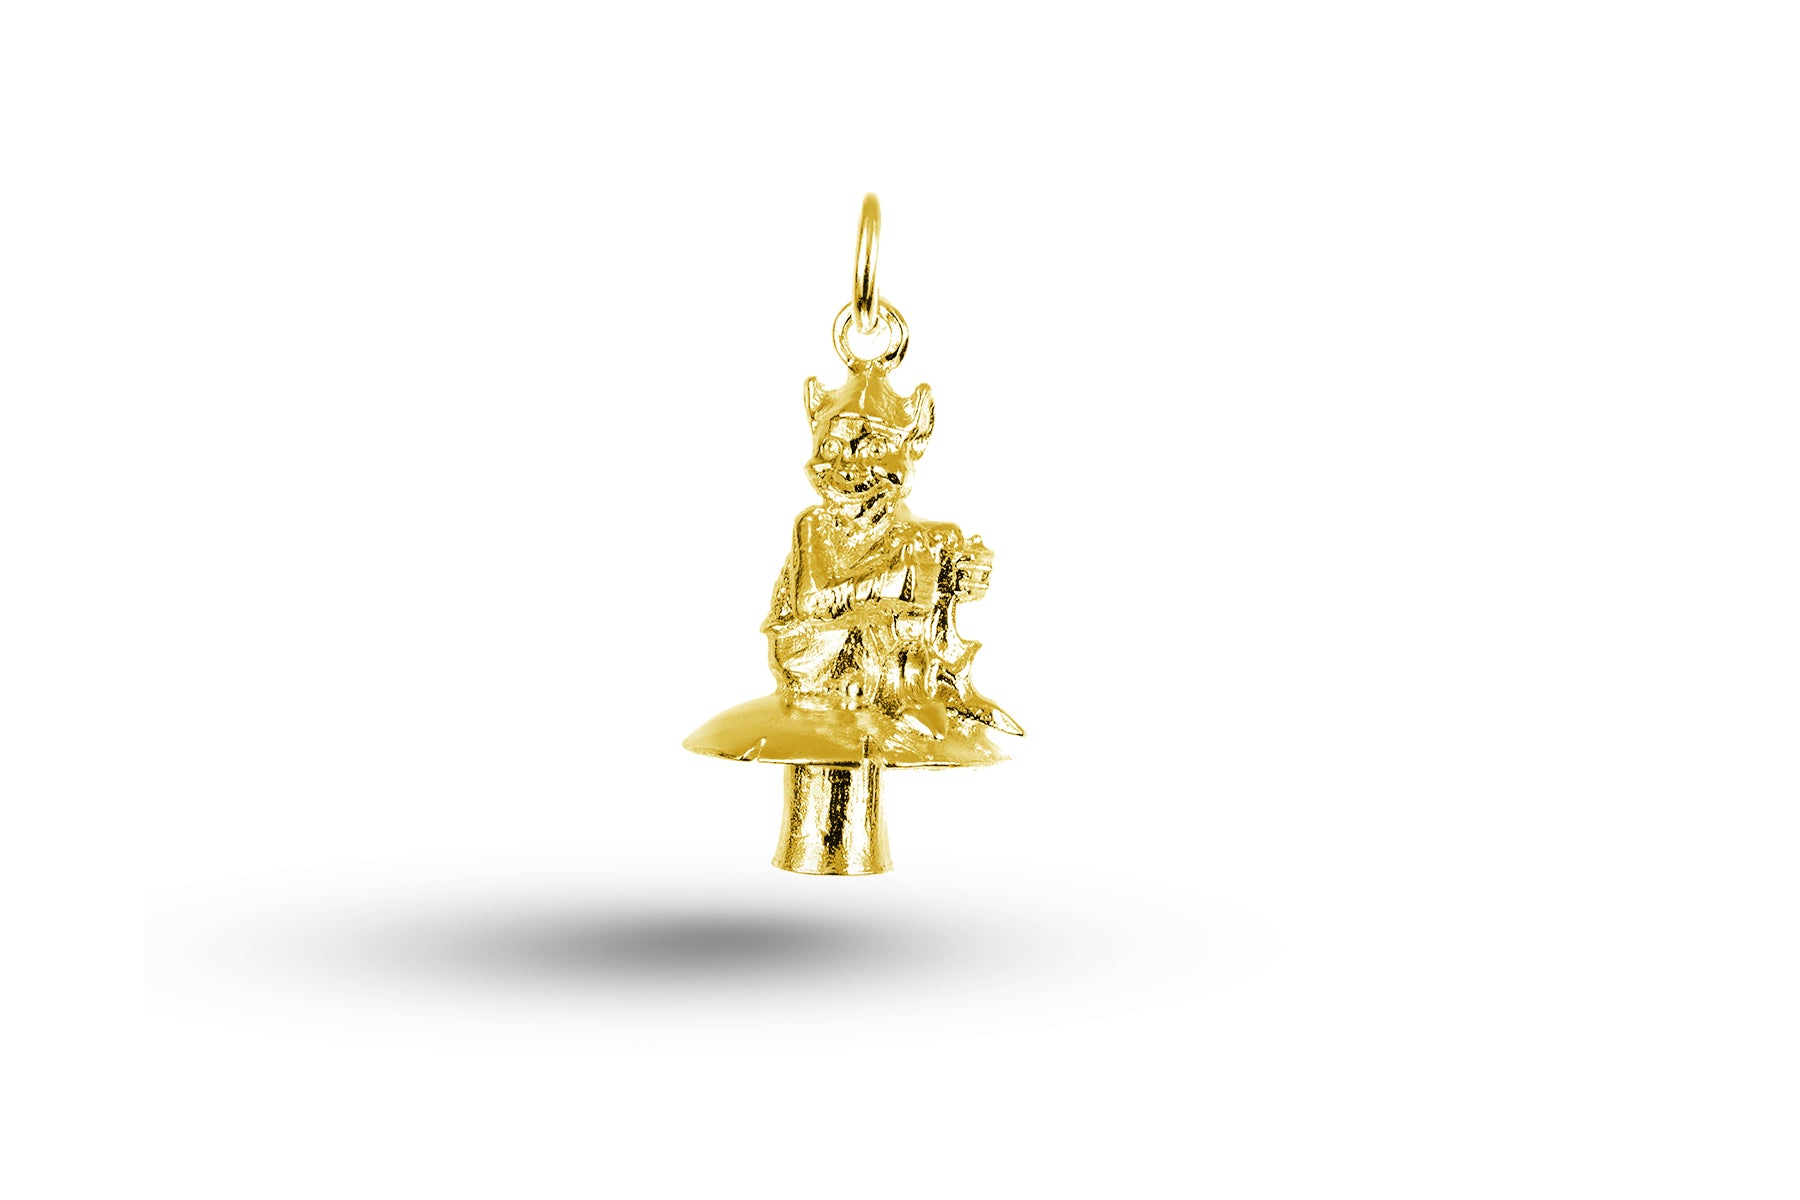 Yellow gold Pixie on Toadstool charm.